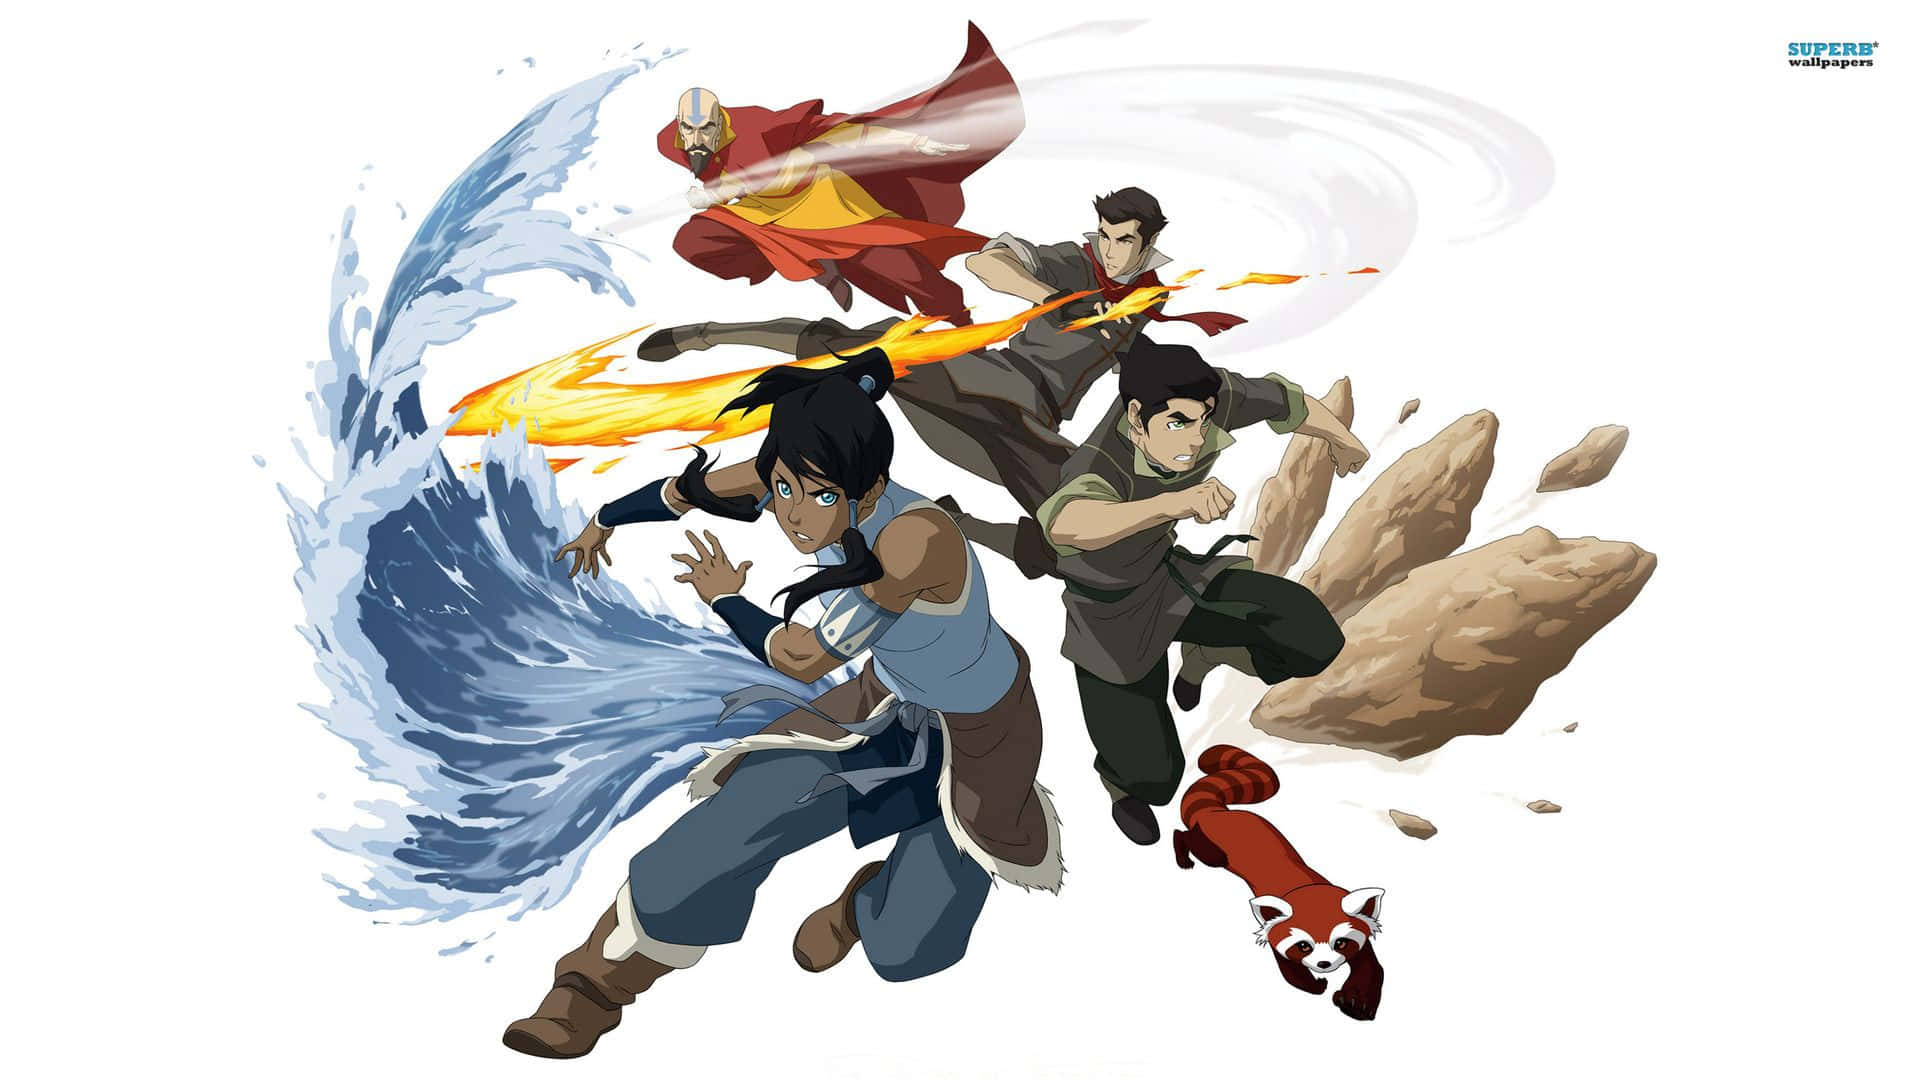 Korra stands tall as the Avatar, ready to defend the world of balance. Wallpaper